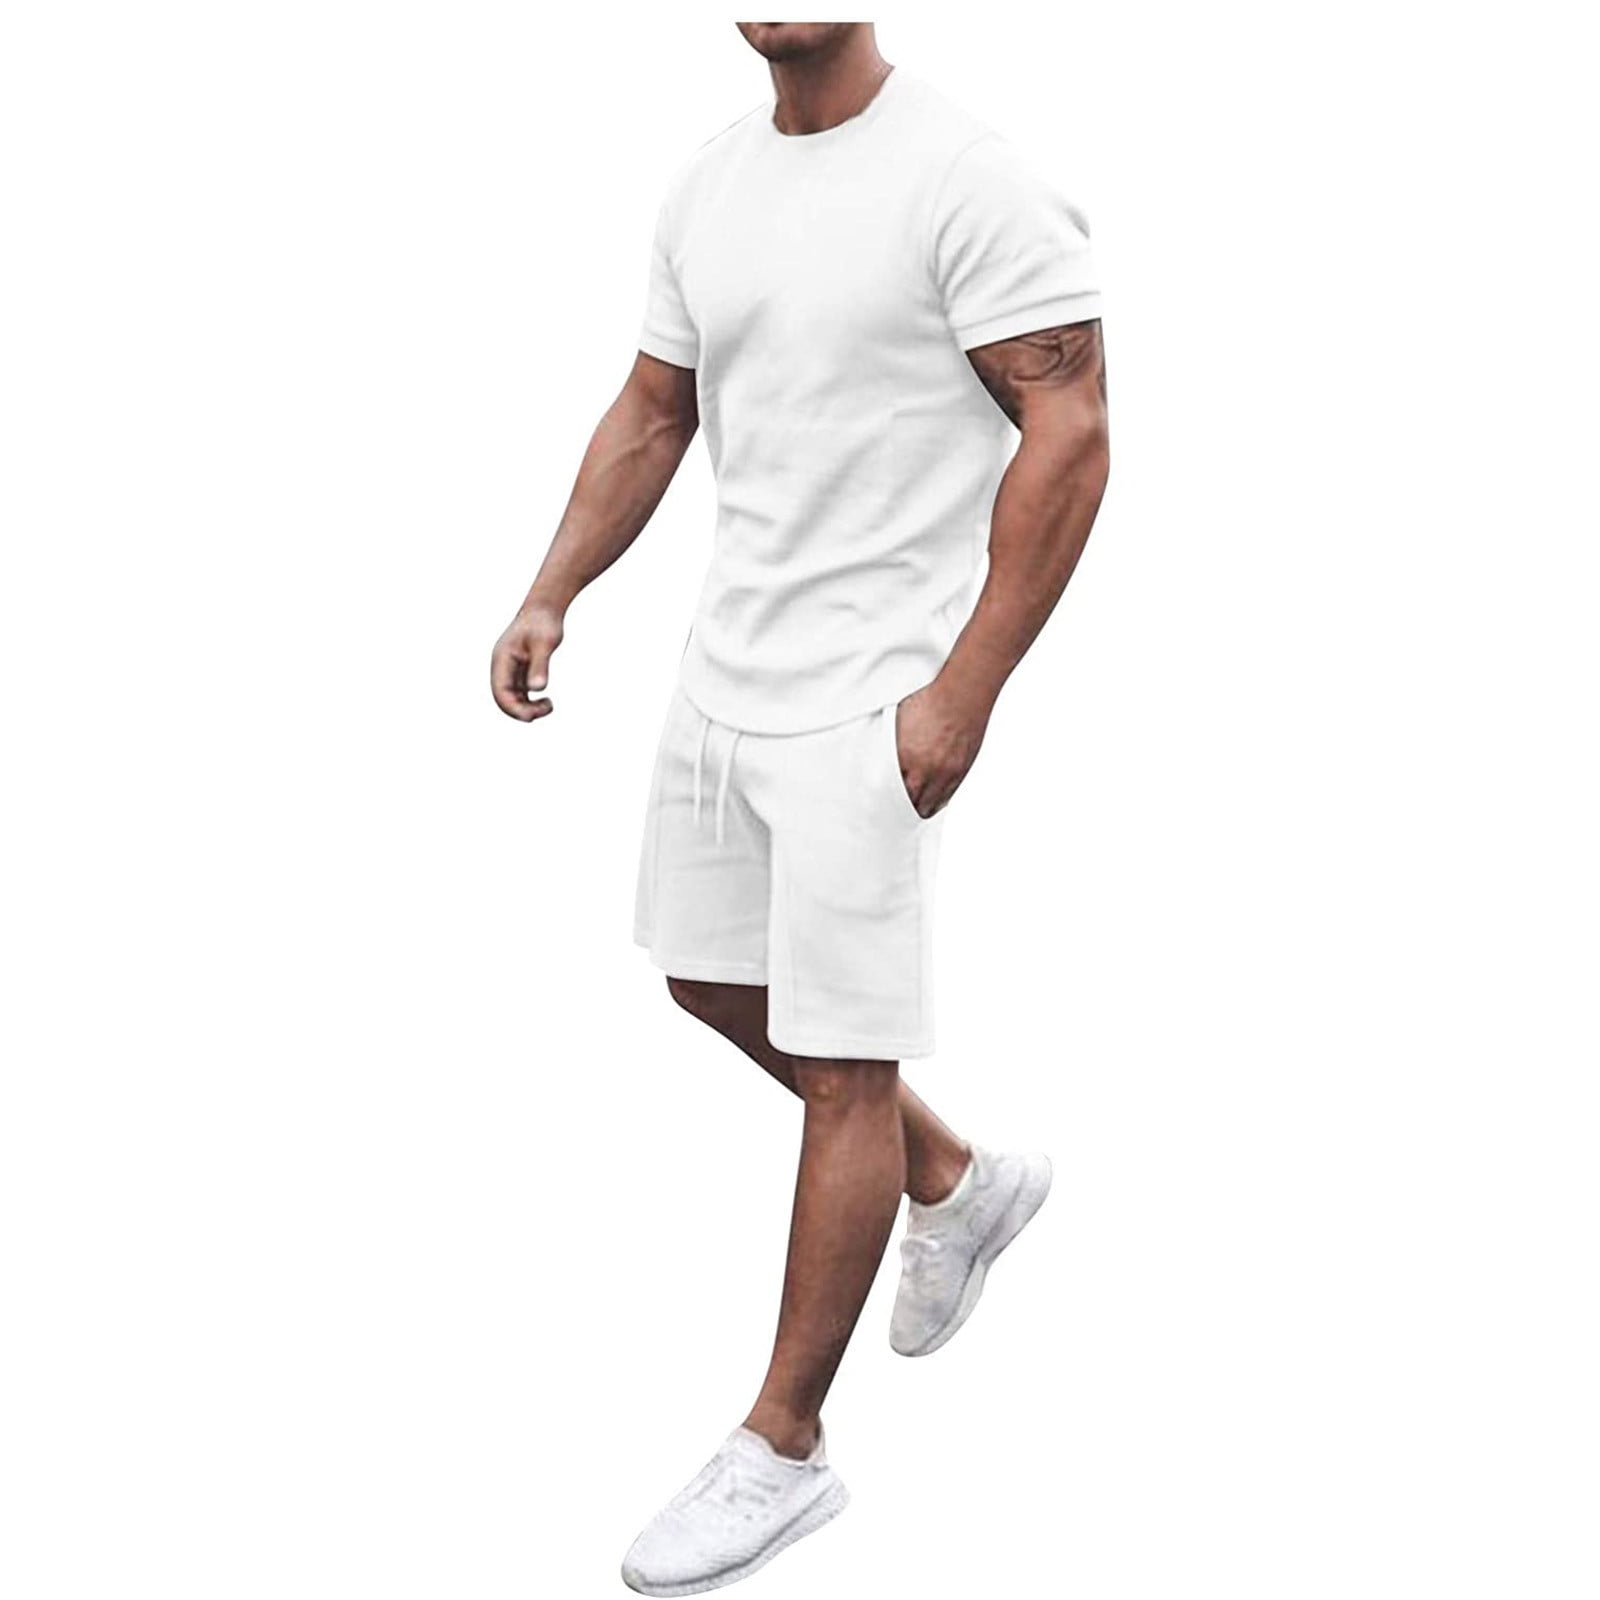 Men 2 Piece Outfits Summer Casual Crew Neck Muscle Long/Short Sleeve Tee Shirts and Classic Fit Sport Shorts Set Tracksuit 